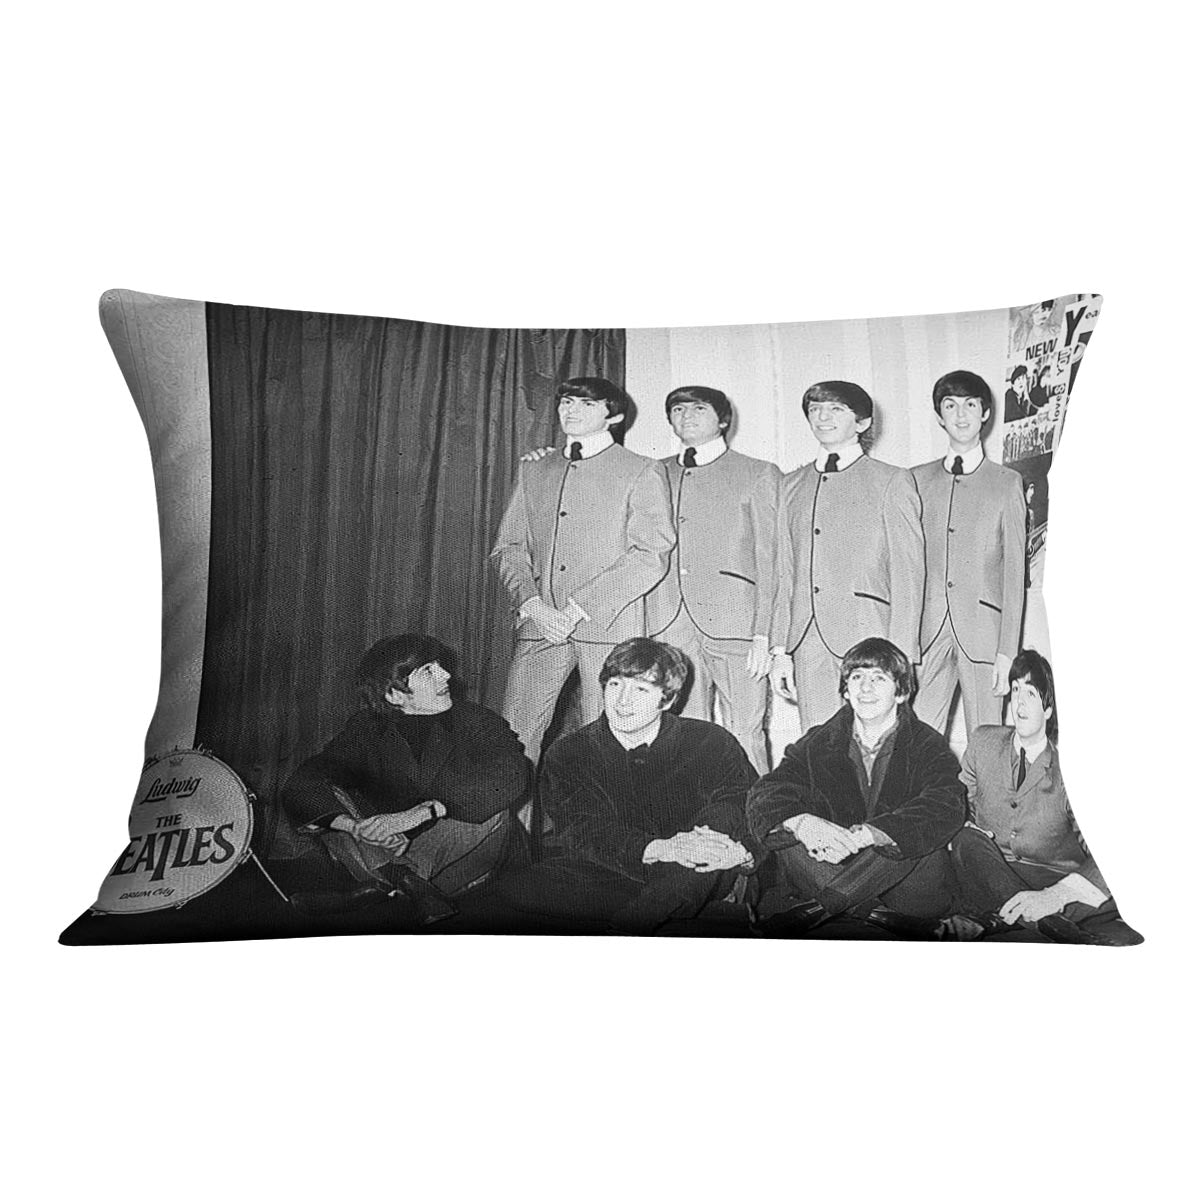 The Beatles at Madame Tussauds Cushion